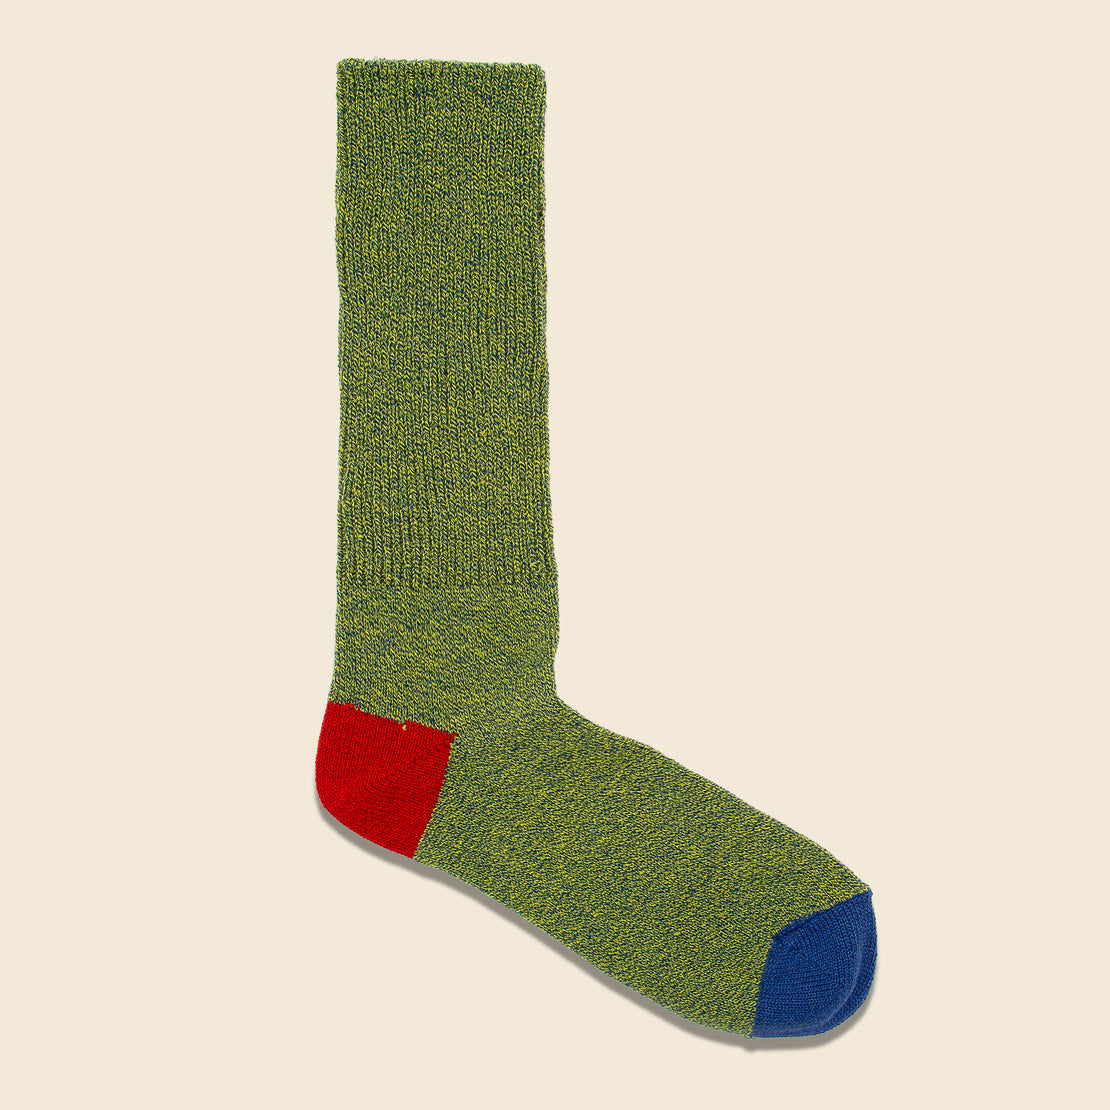 Anonymous Ism 2-Point Heel/Toe Crew Sock - Green/Red/Blue